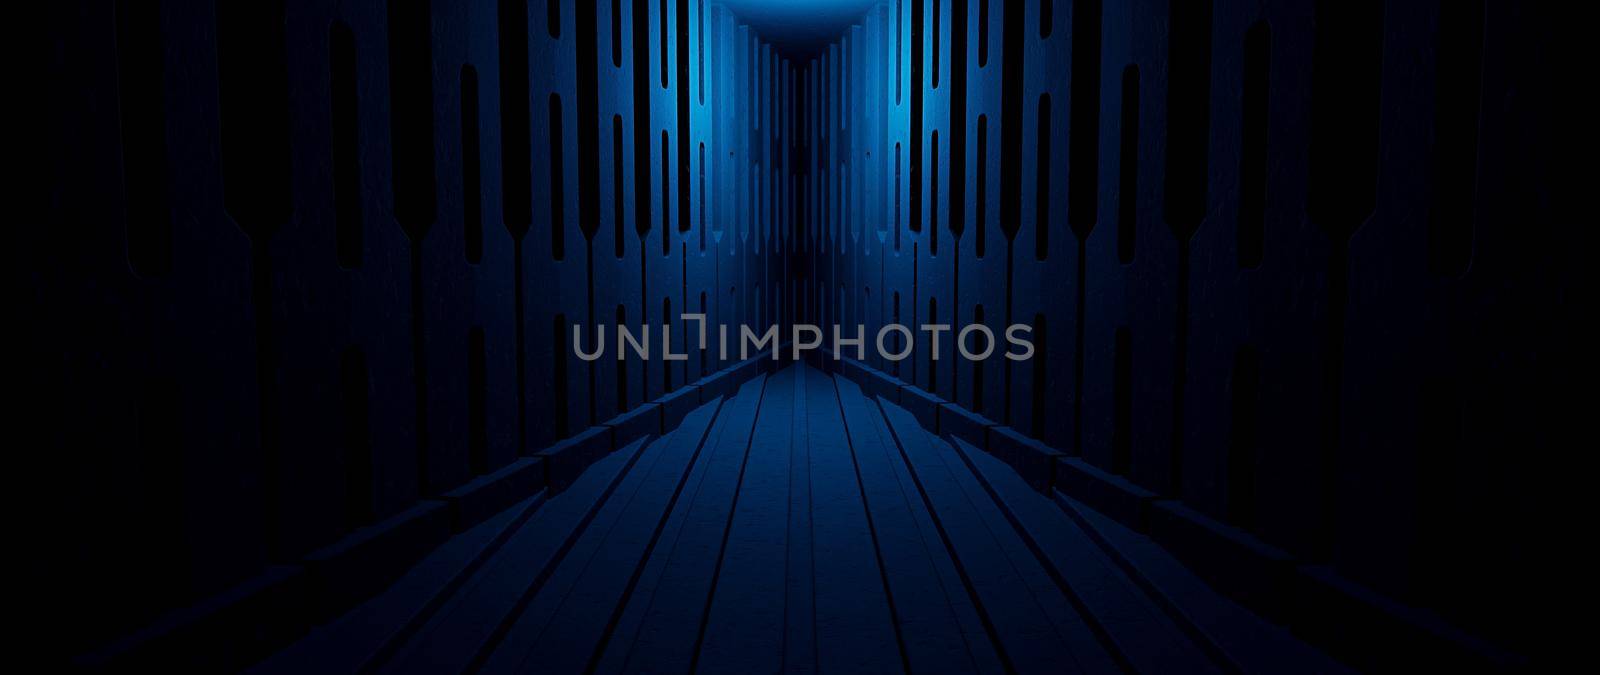 Modern Digital Simulation Cyber Warehouse Futuristic Interior Dark Black Abstract Background With Space For Products 3D Rendering by yay_lmrb